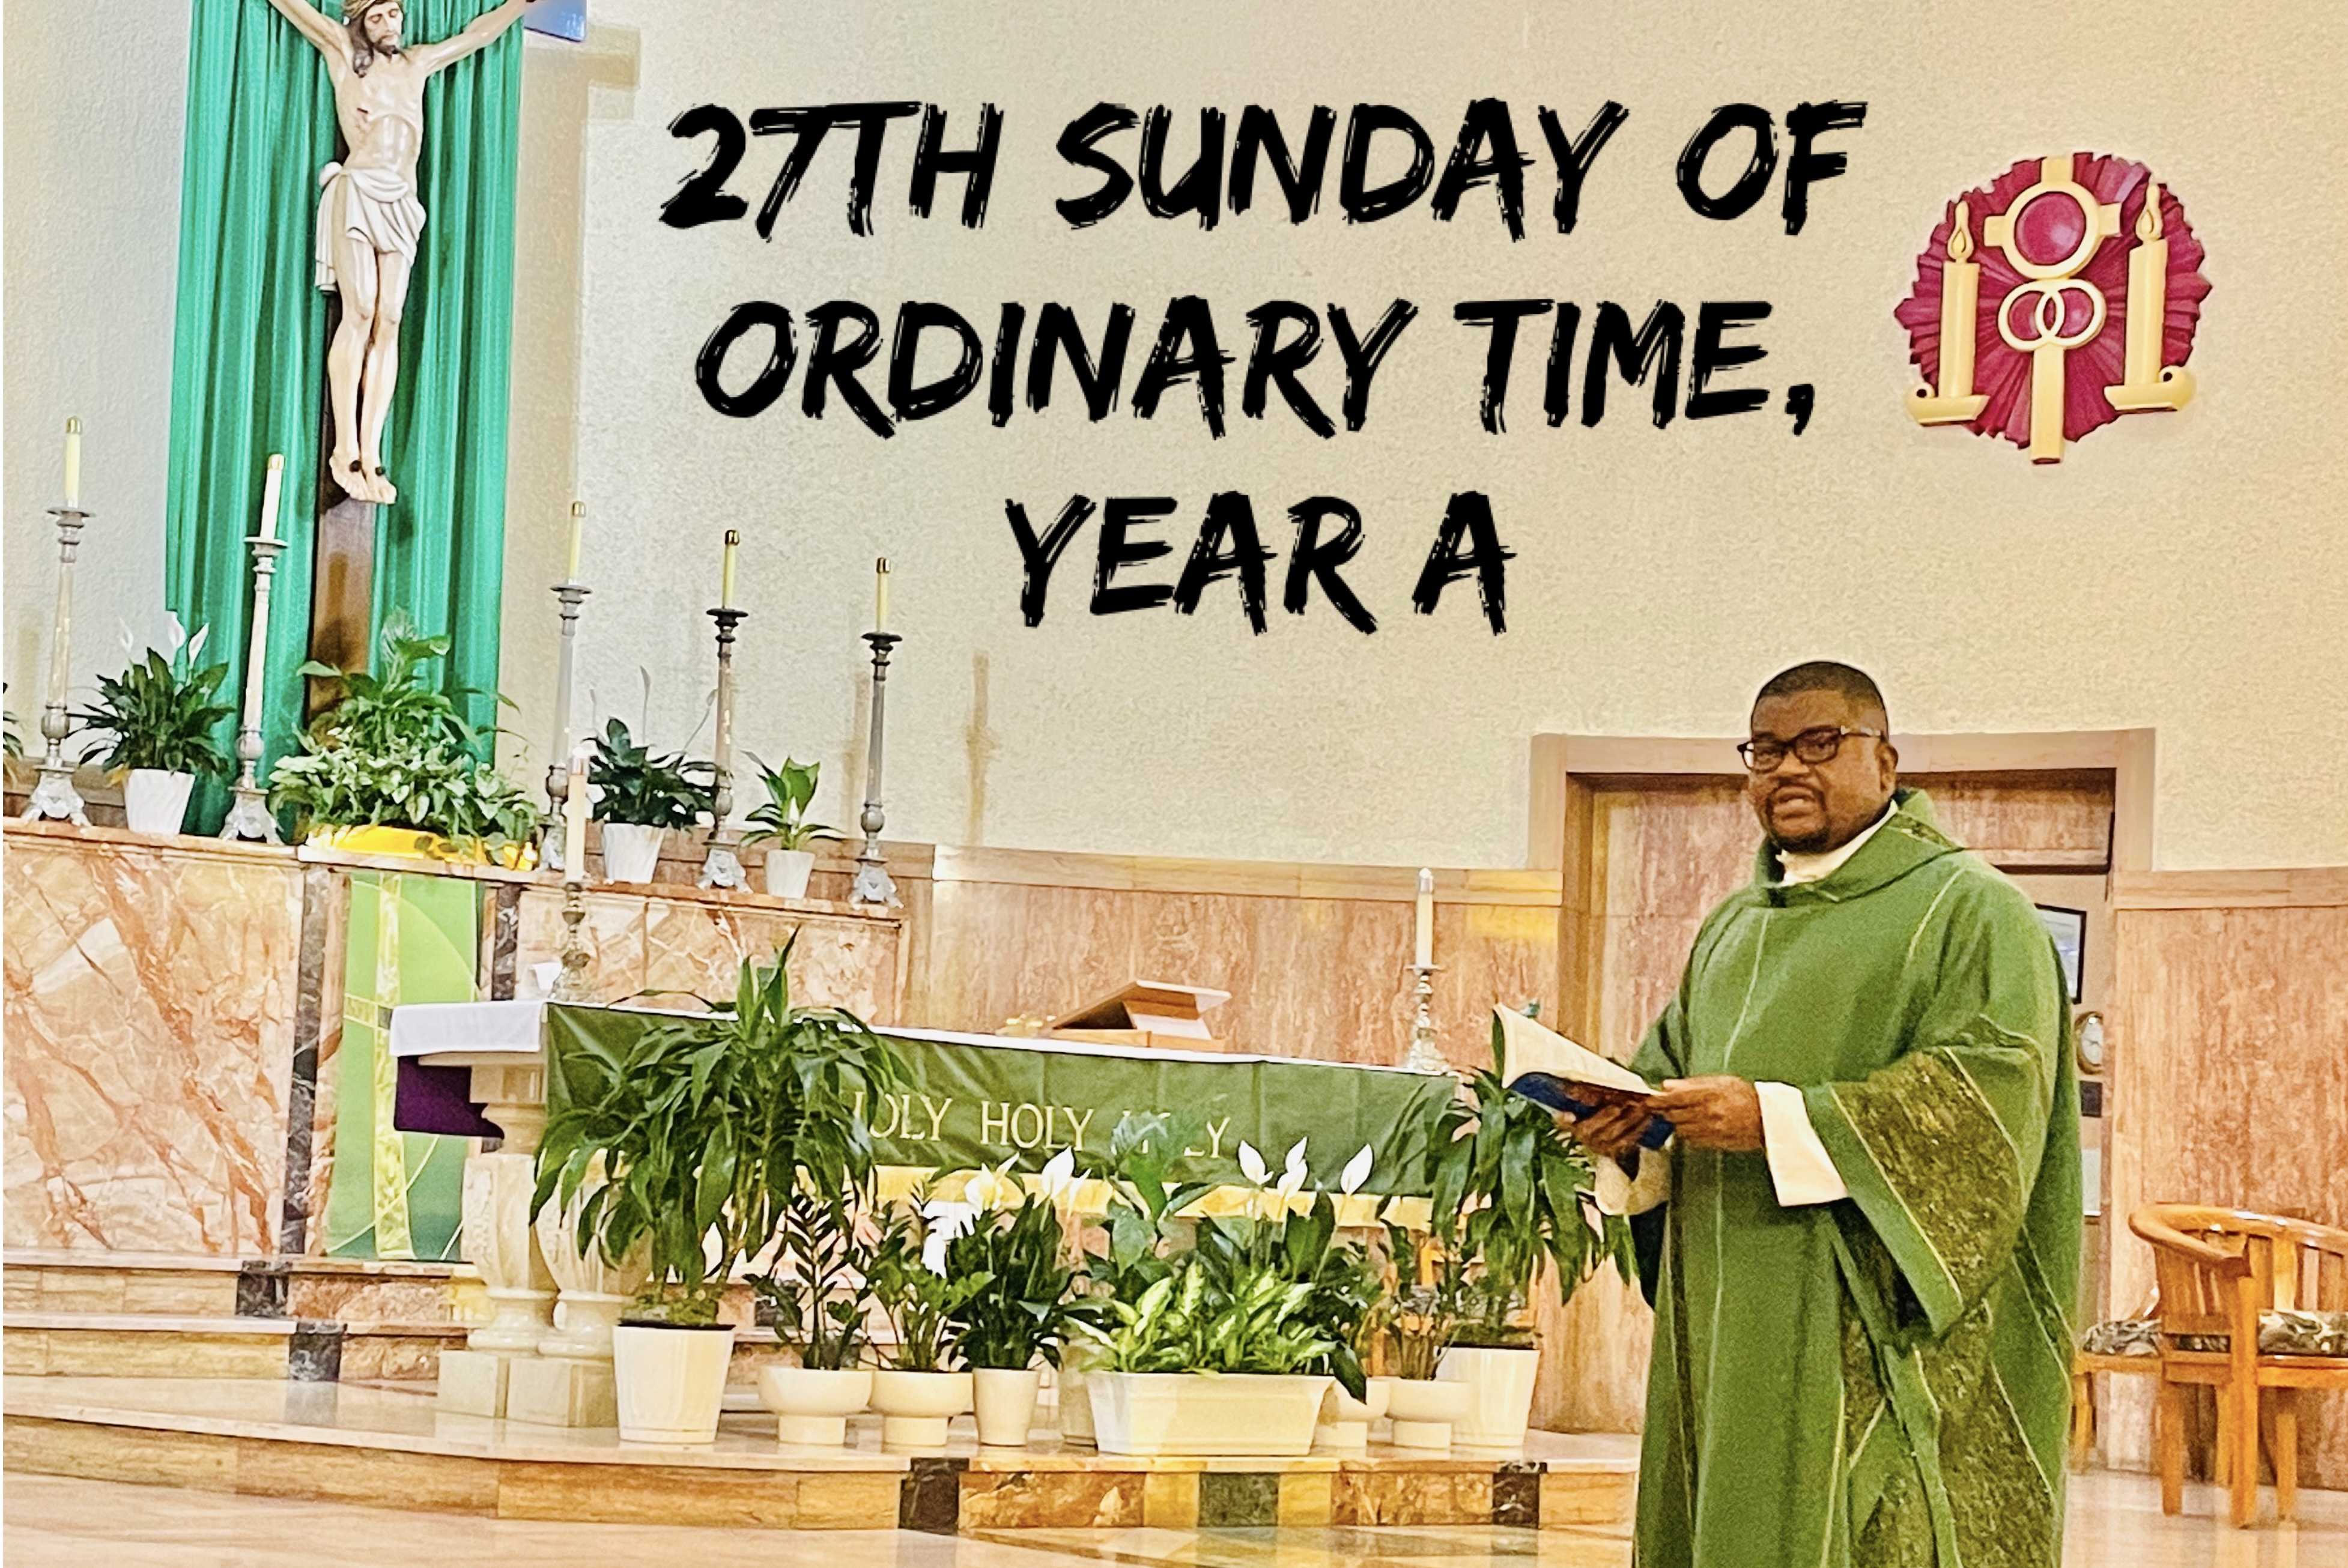 27th Sunday of Ordinary Time, Year A